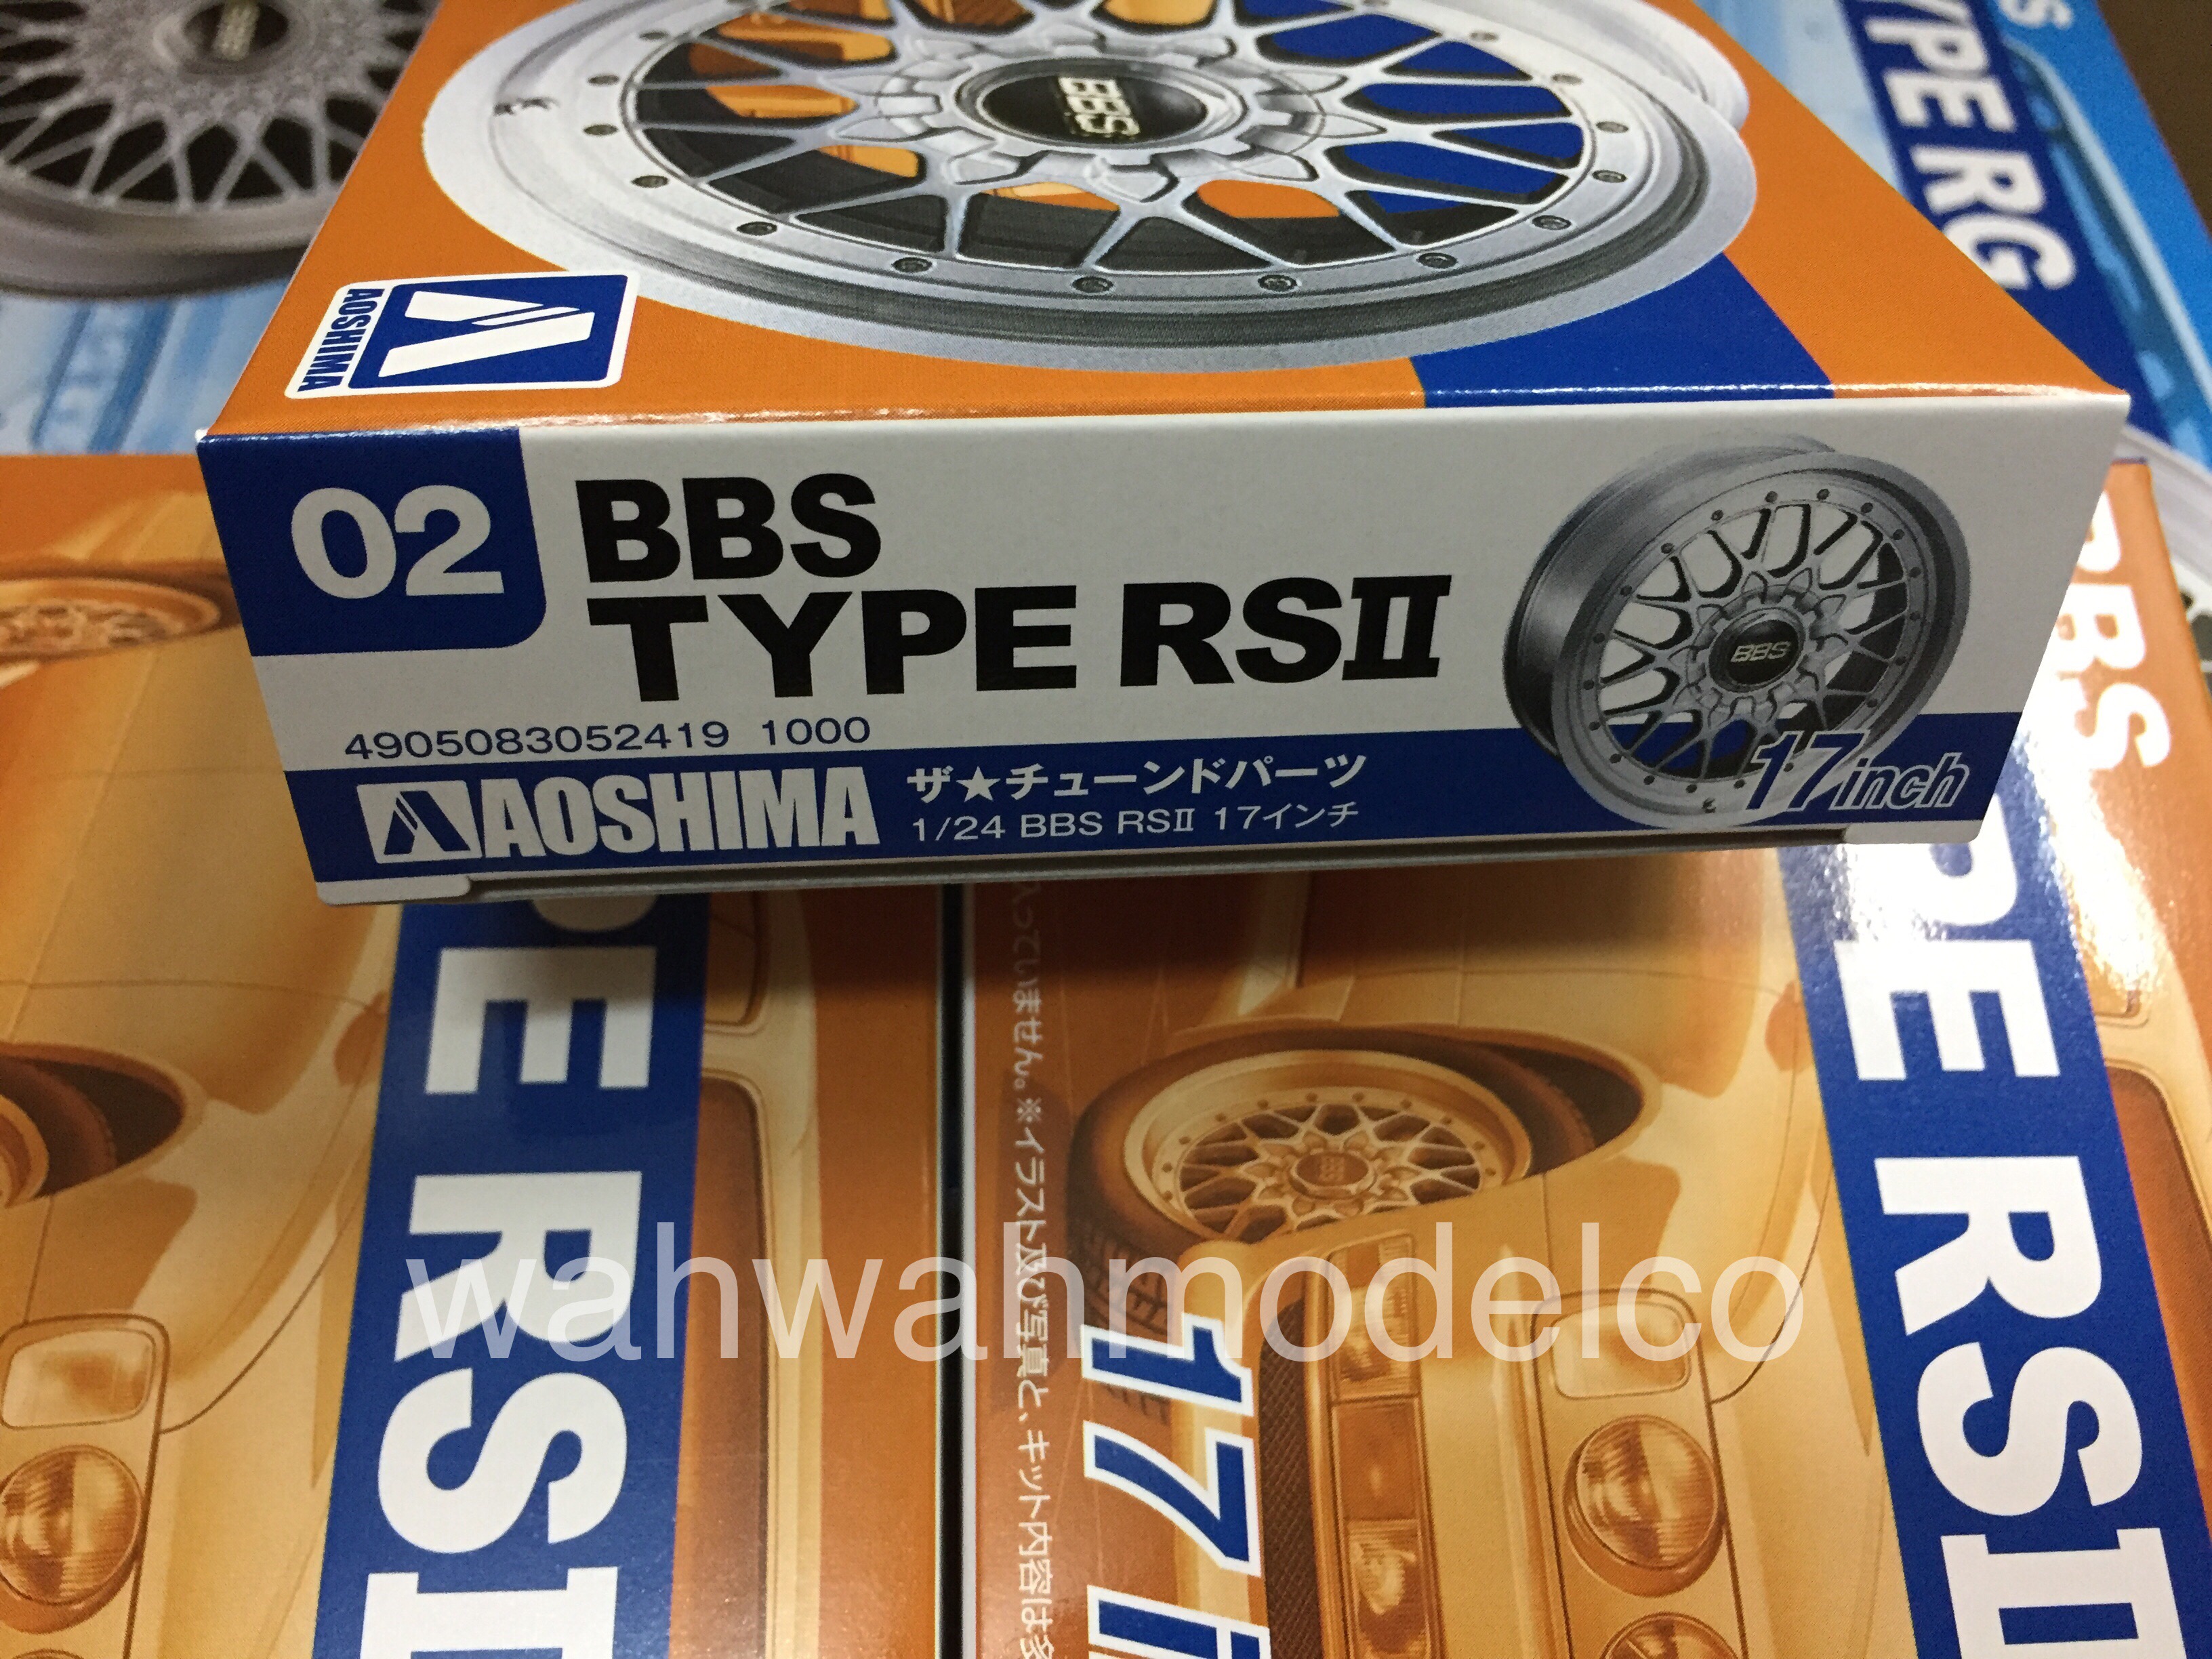 AOSHIMA 52419 Tuned Parts 02 1/24 BBS RS II 17inch Tire & Wheel Set for sale online 